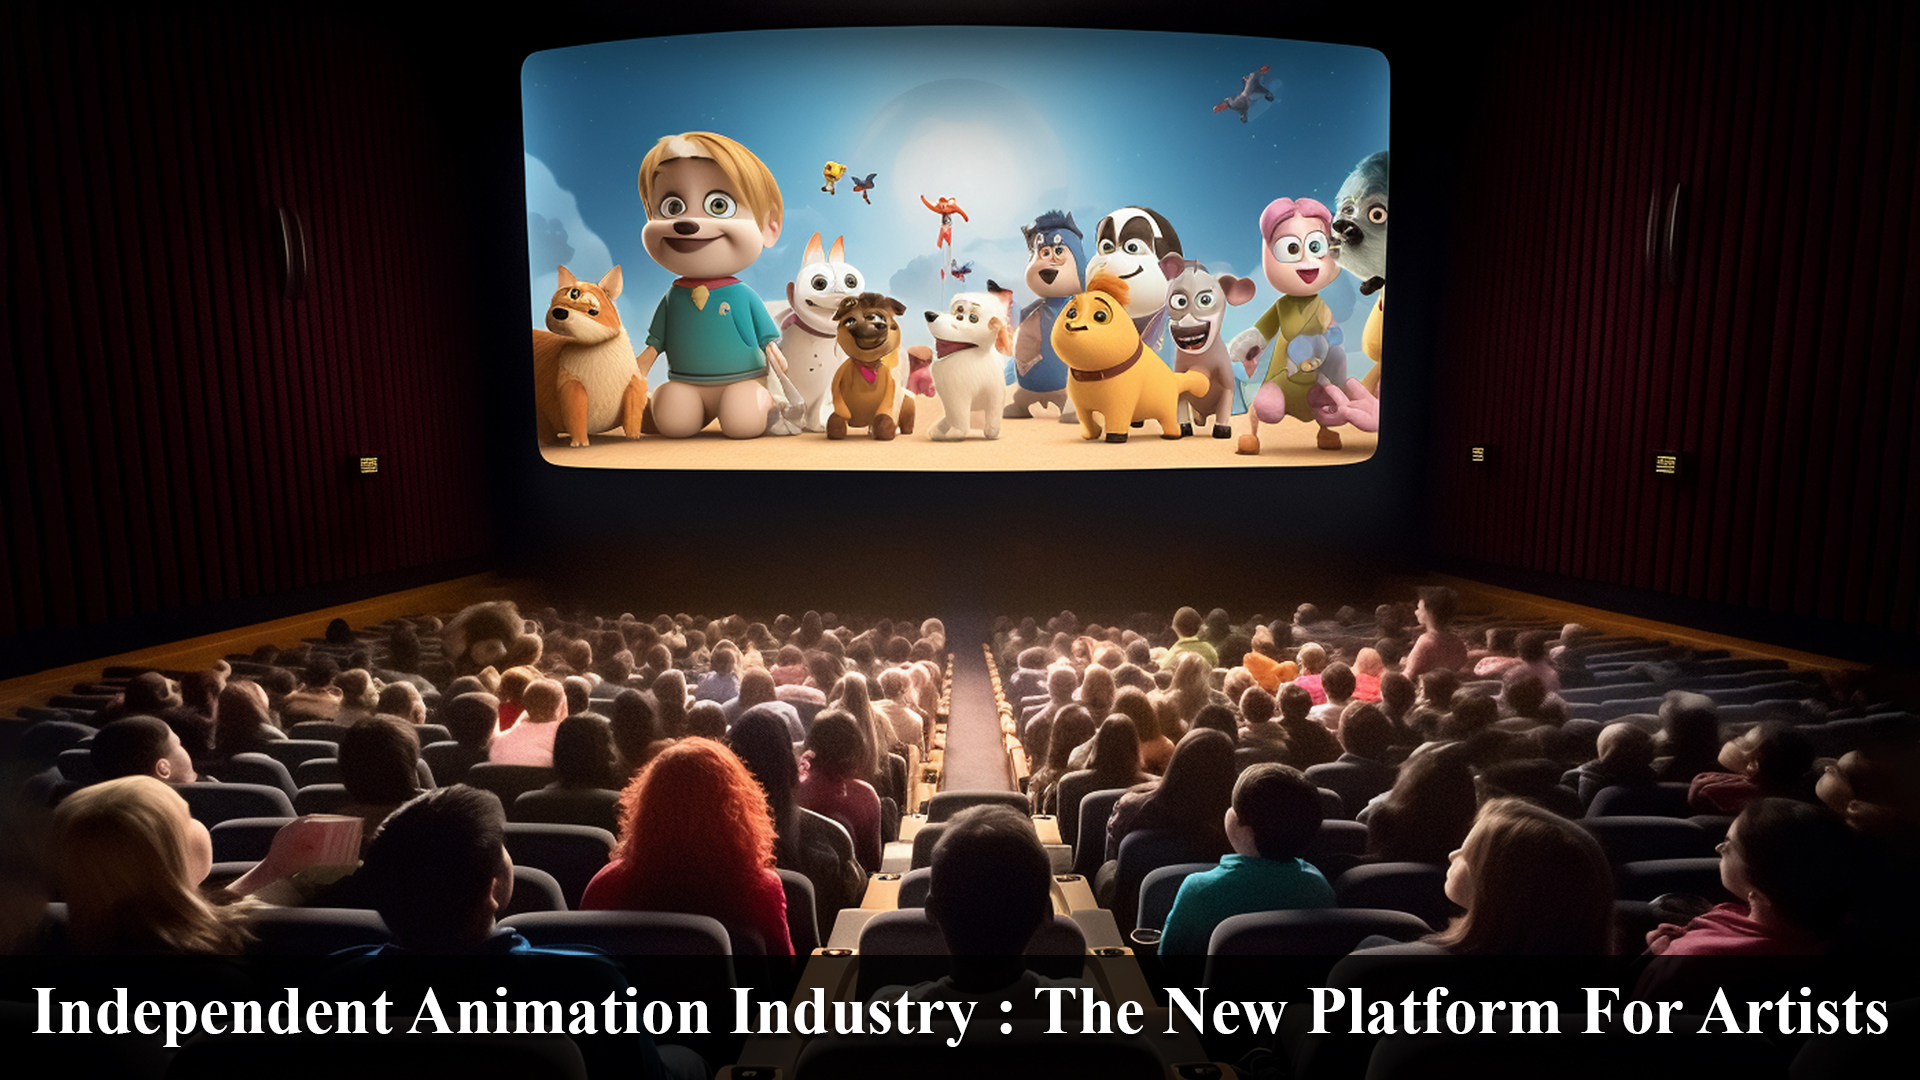 Independent Animation Industry: The New Platform for Artists